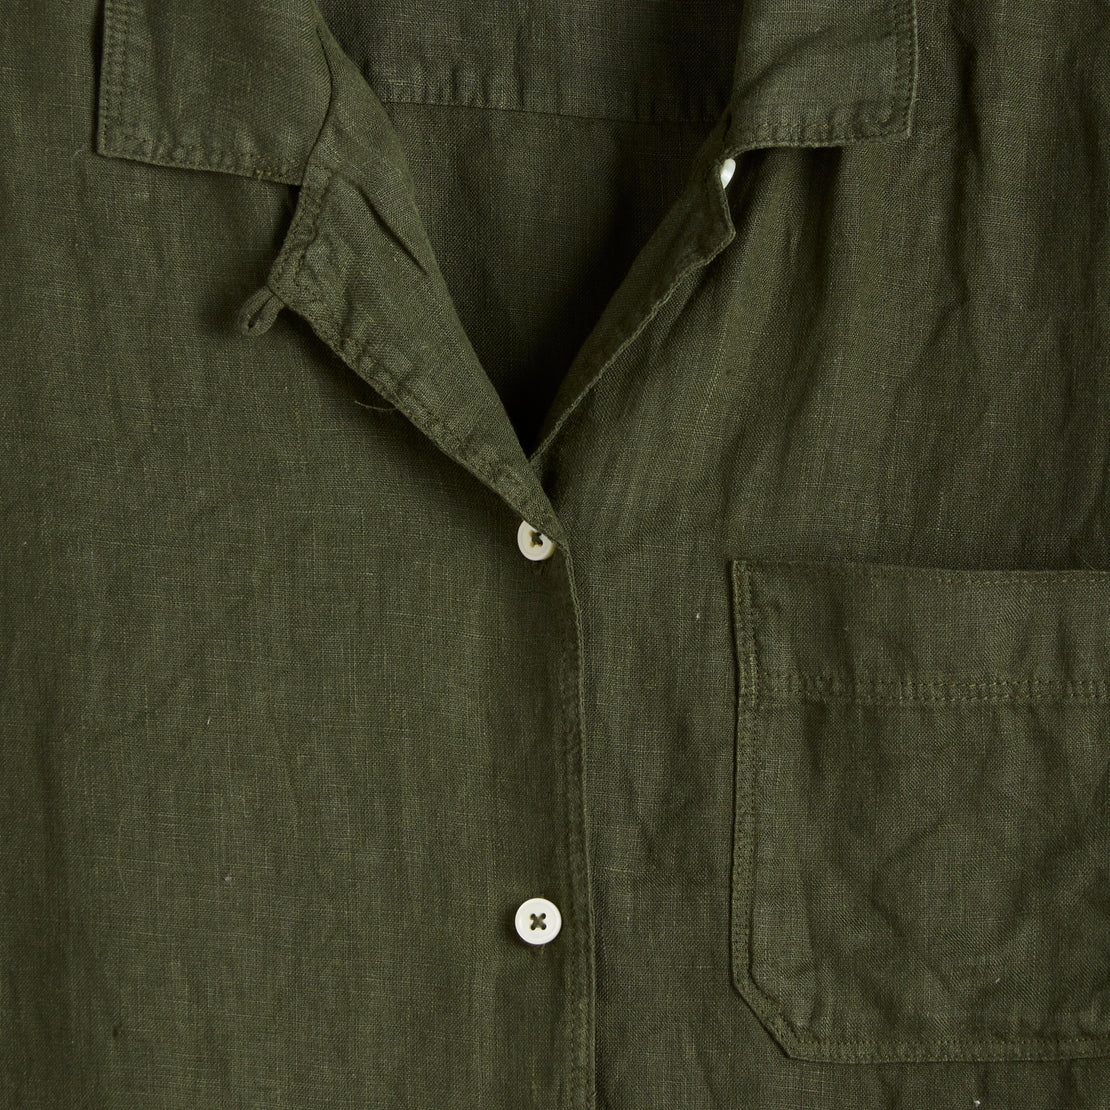 Maddie Camp Shirt in Linen - Pine Needle - Alex Mill - STAG Provisions - W - Tops - S/S Woven